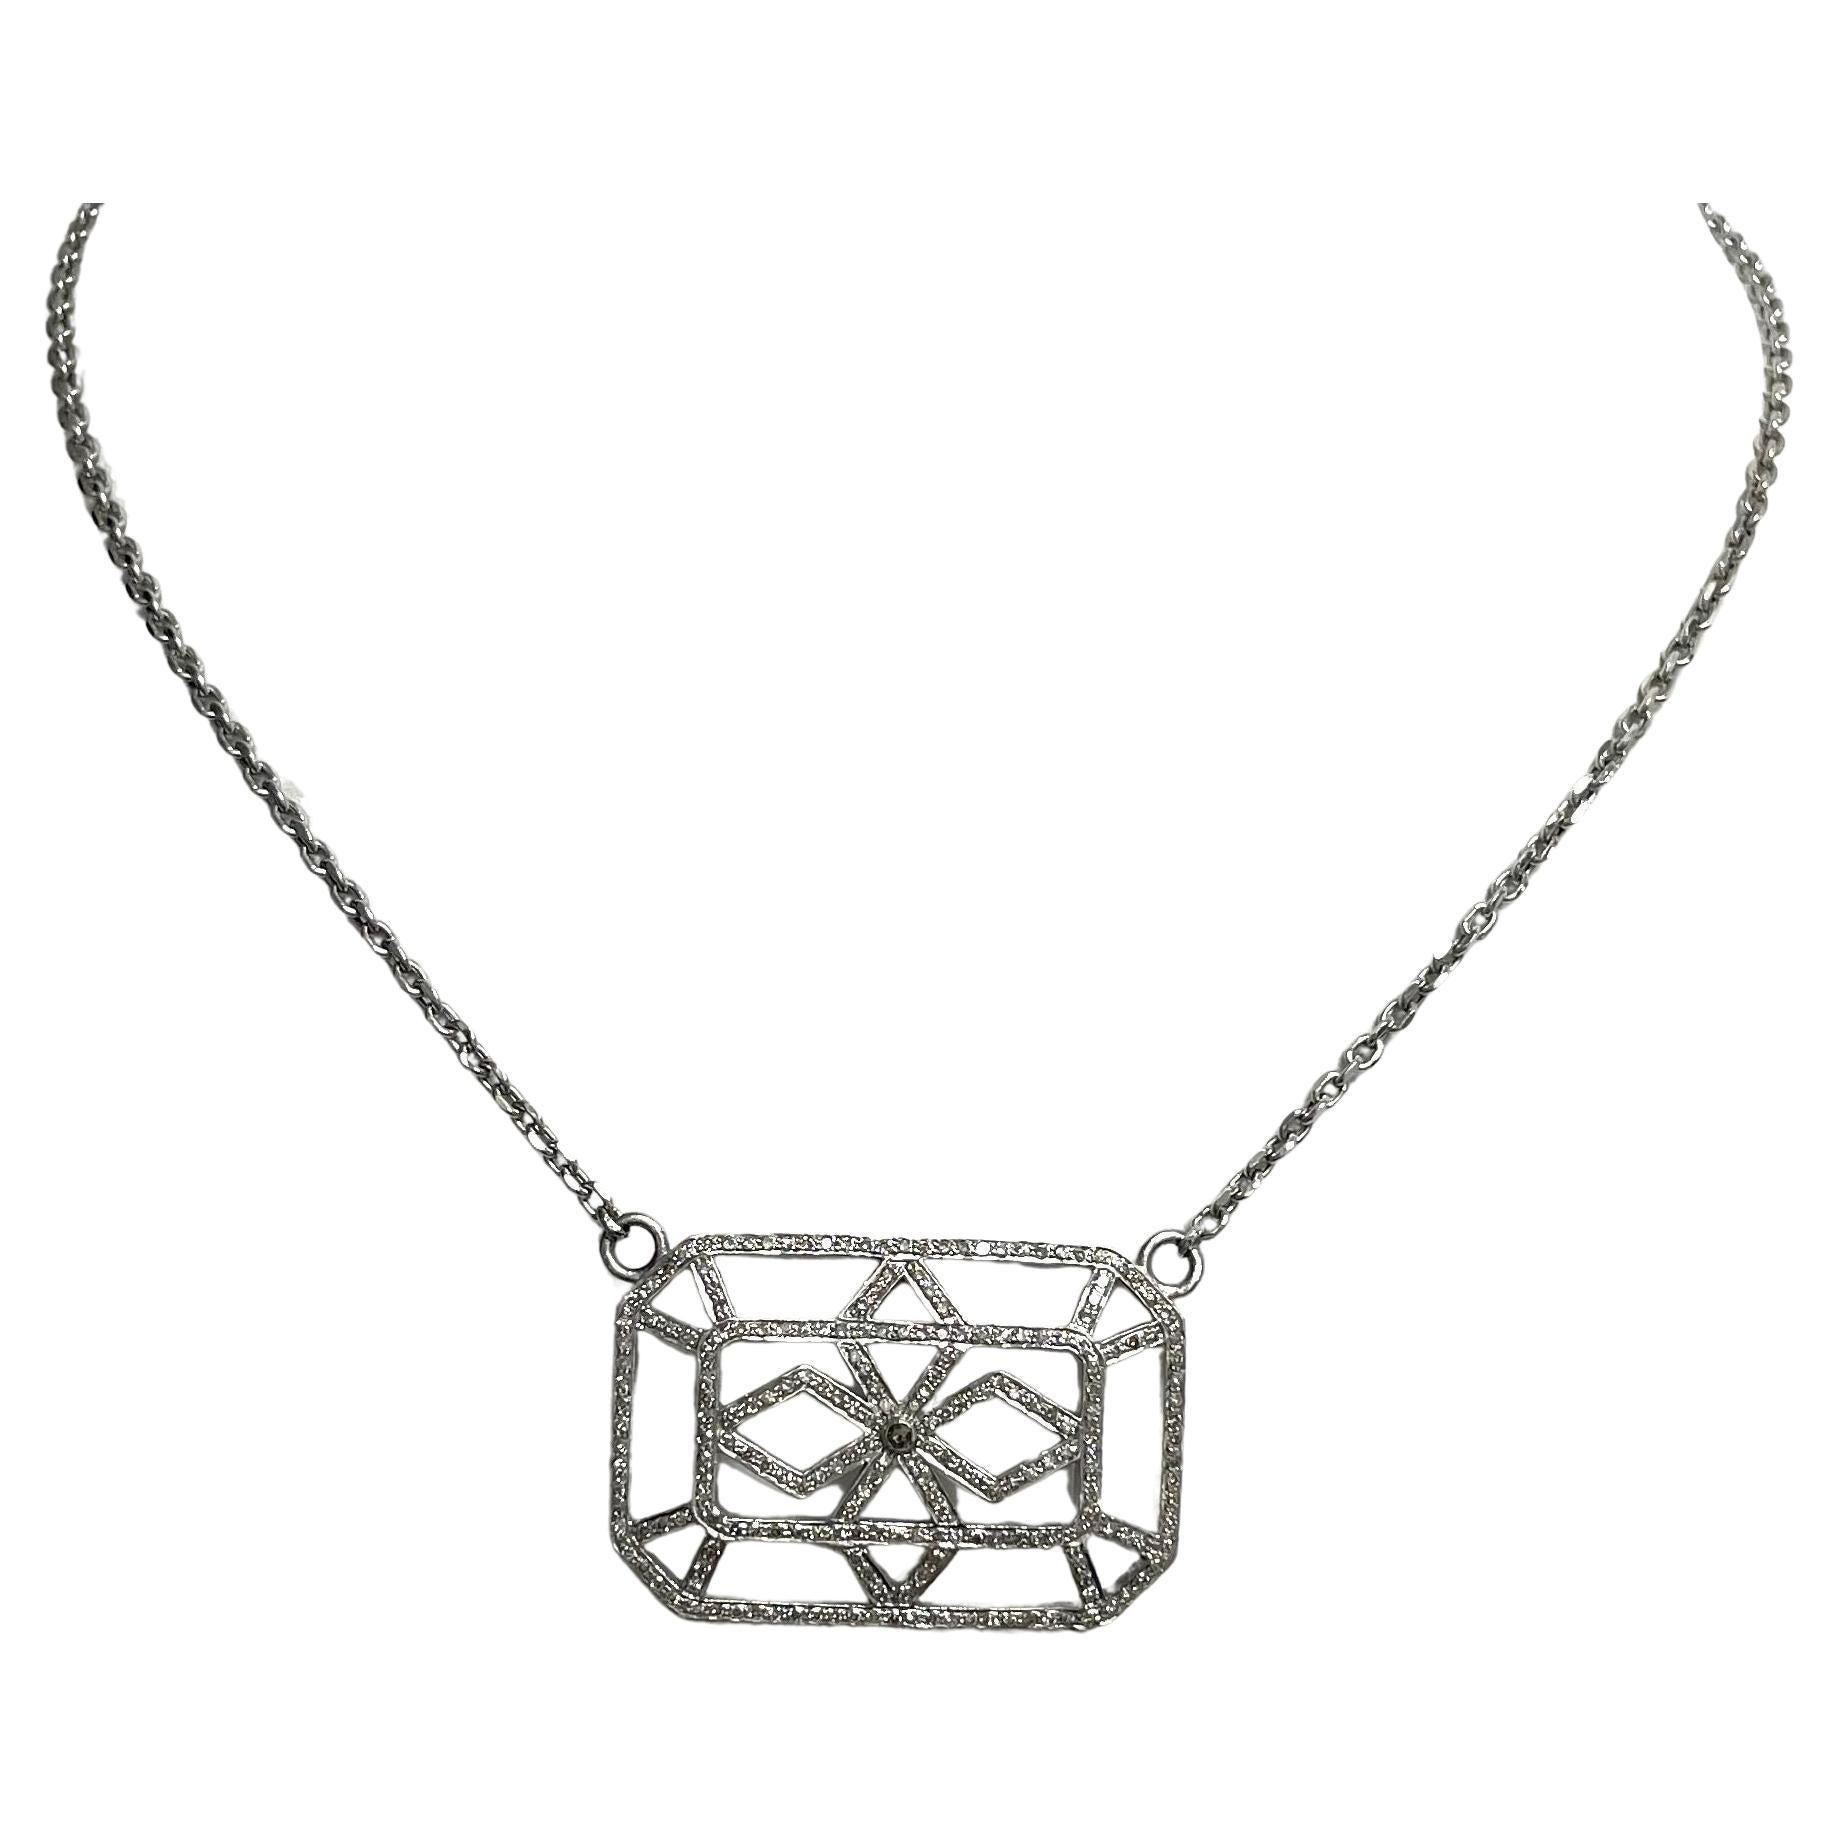 Pave Diamond Rectangular Pendant On White Gold Chain Necklace For Sale